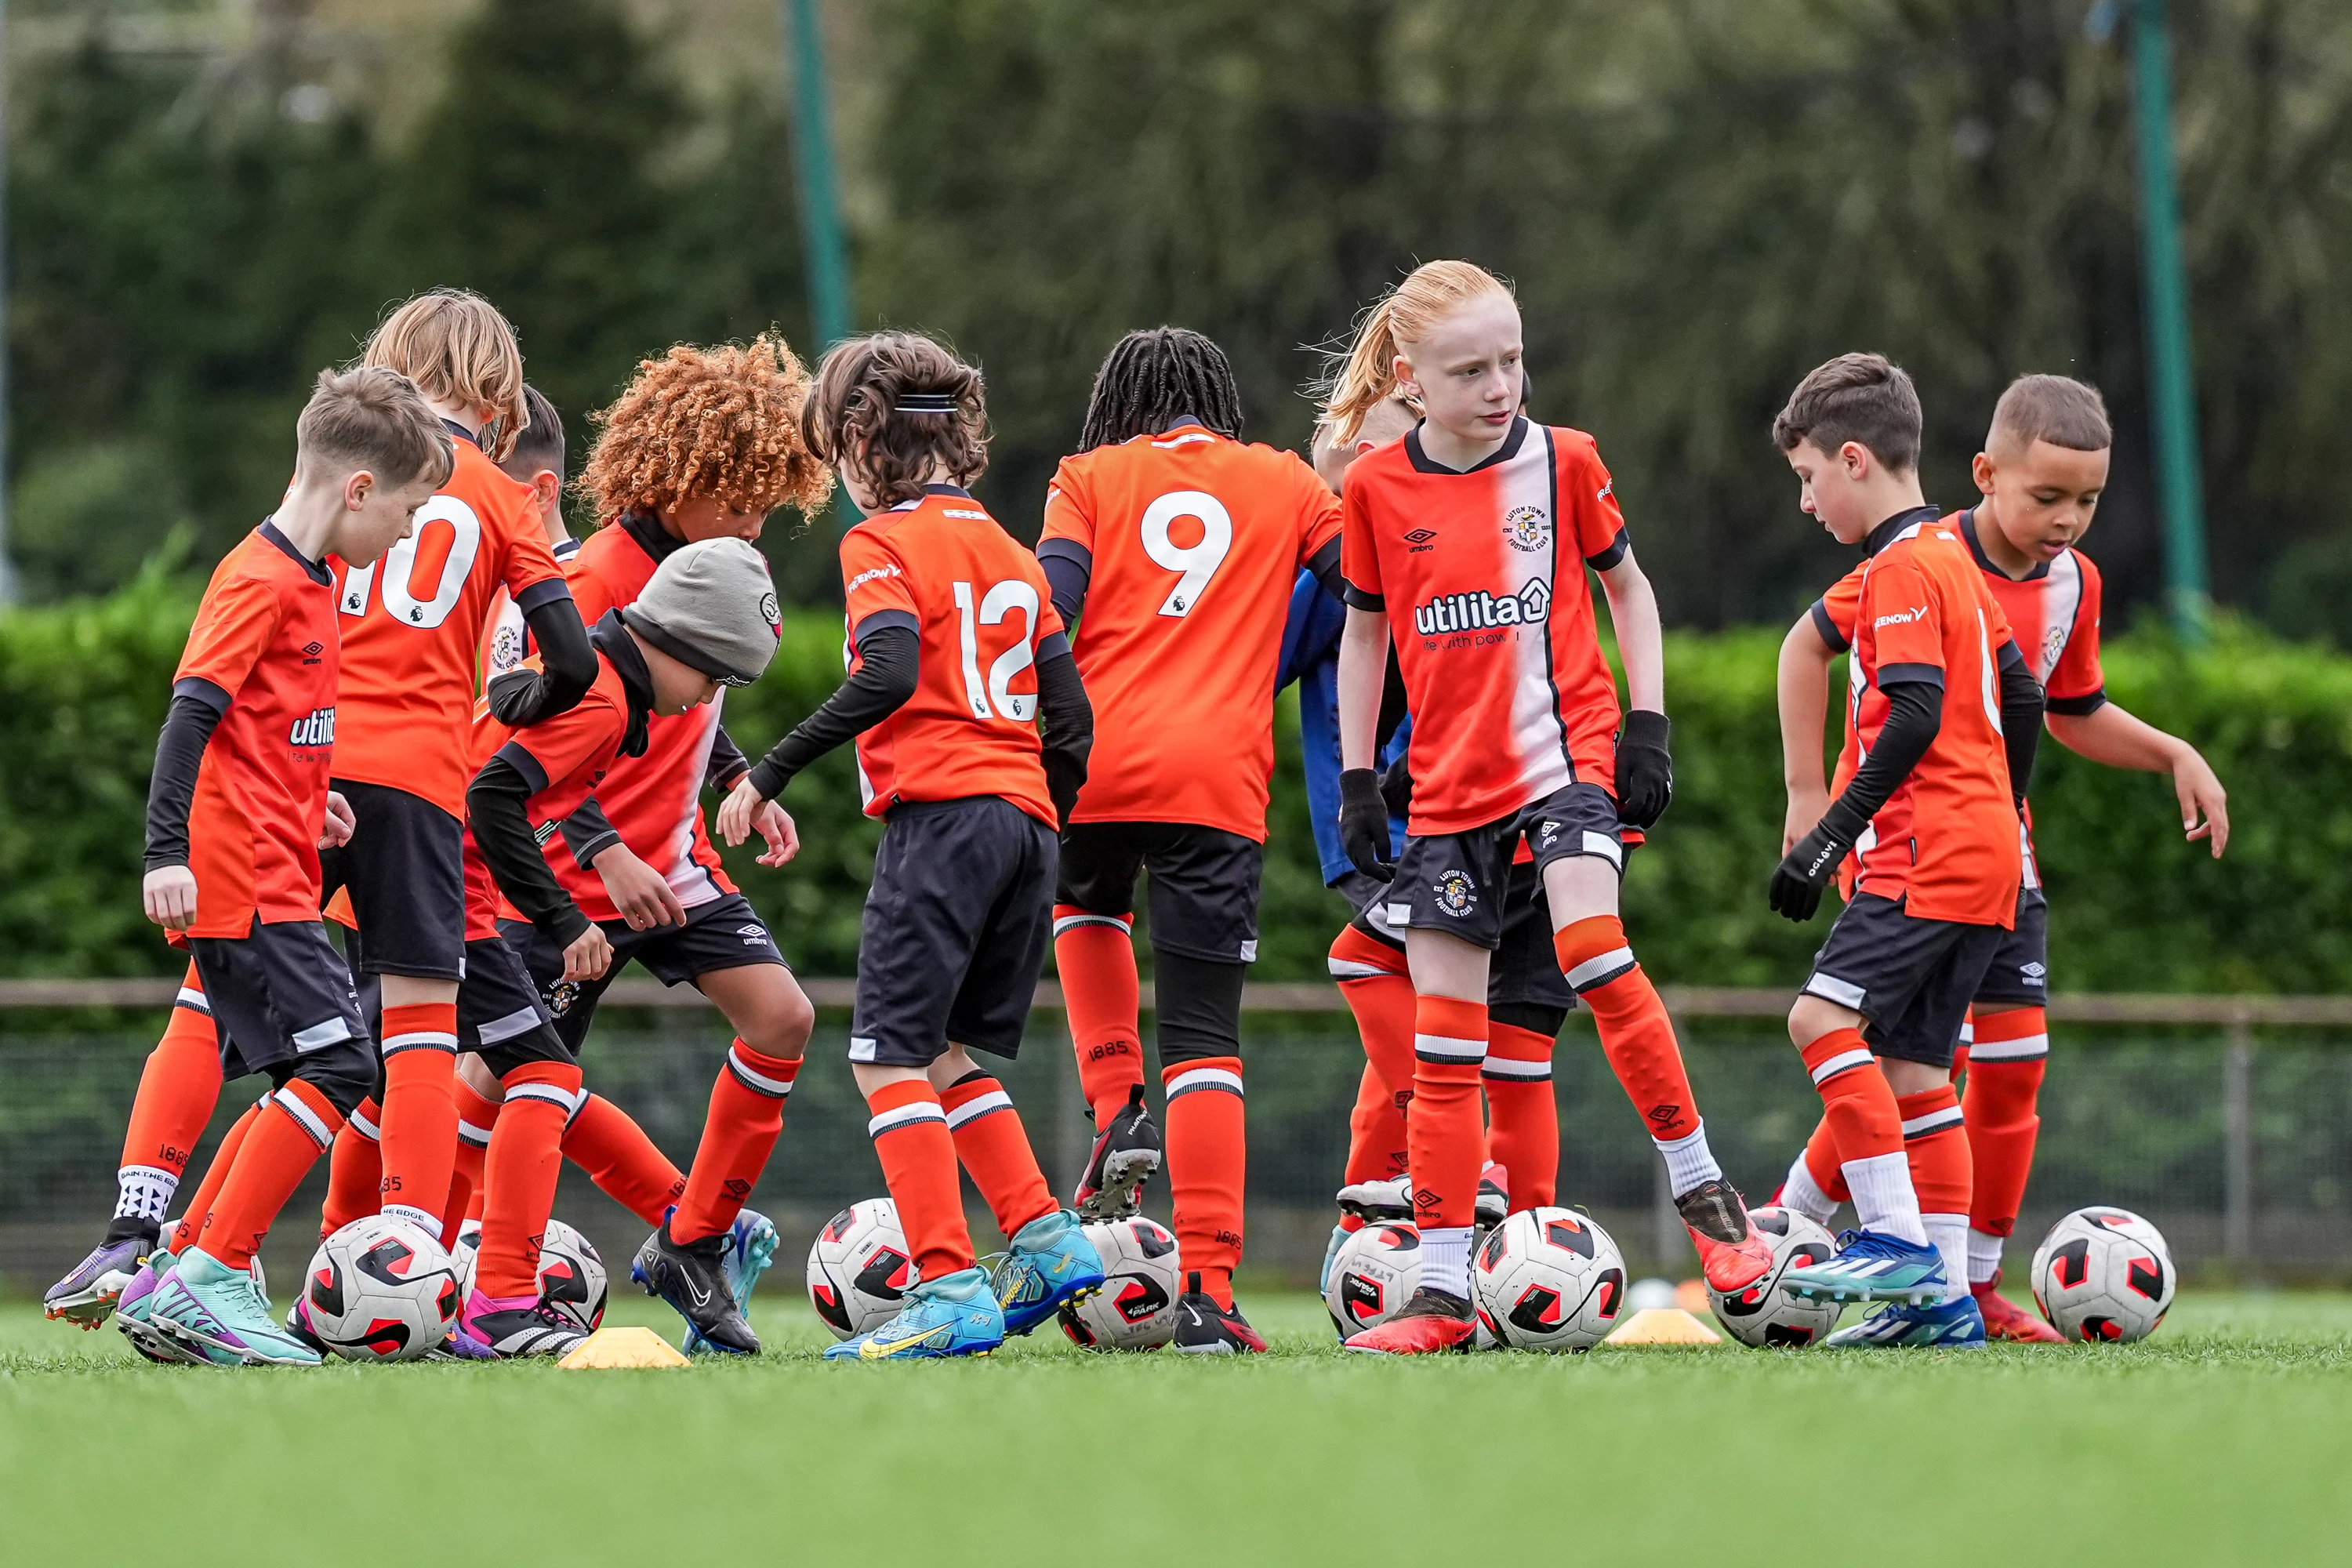 Young players in the Luton Town Academy